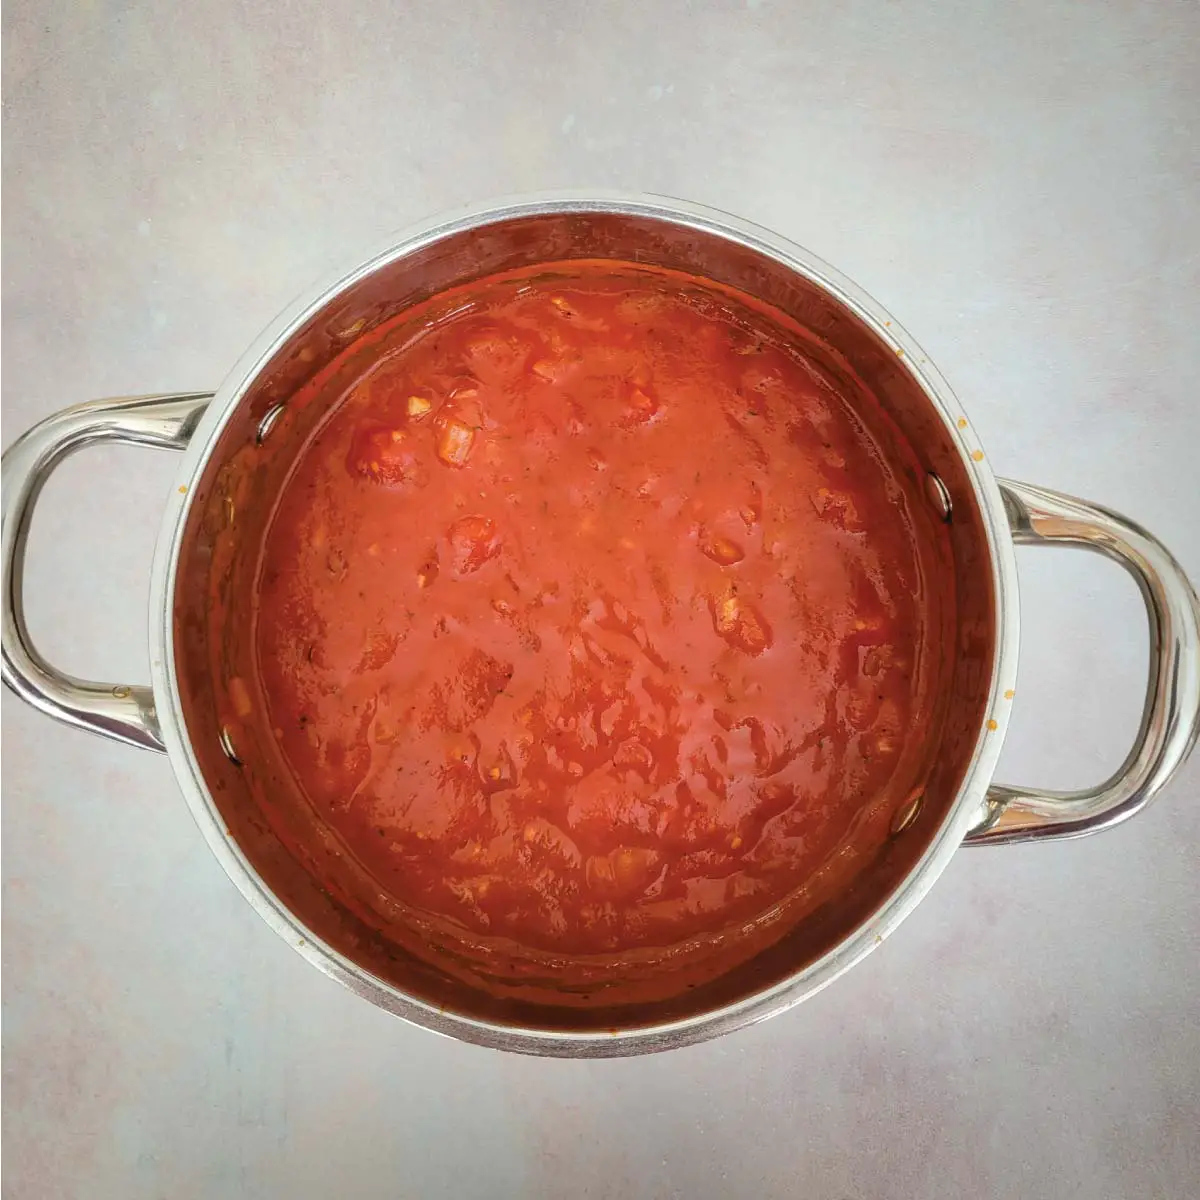 Lasagna sauce in a sauce pot after cooking ready to use.